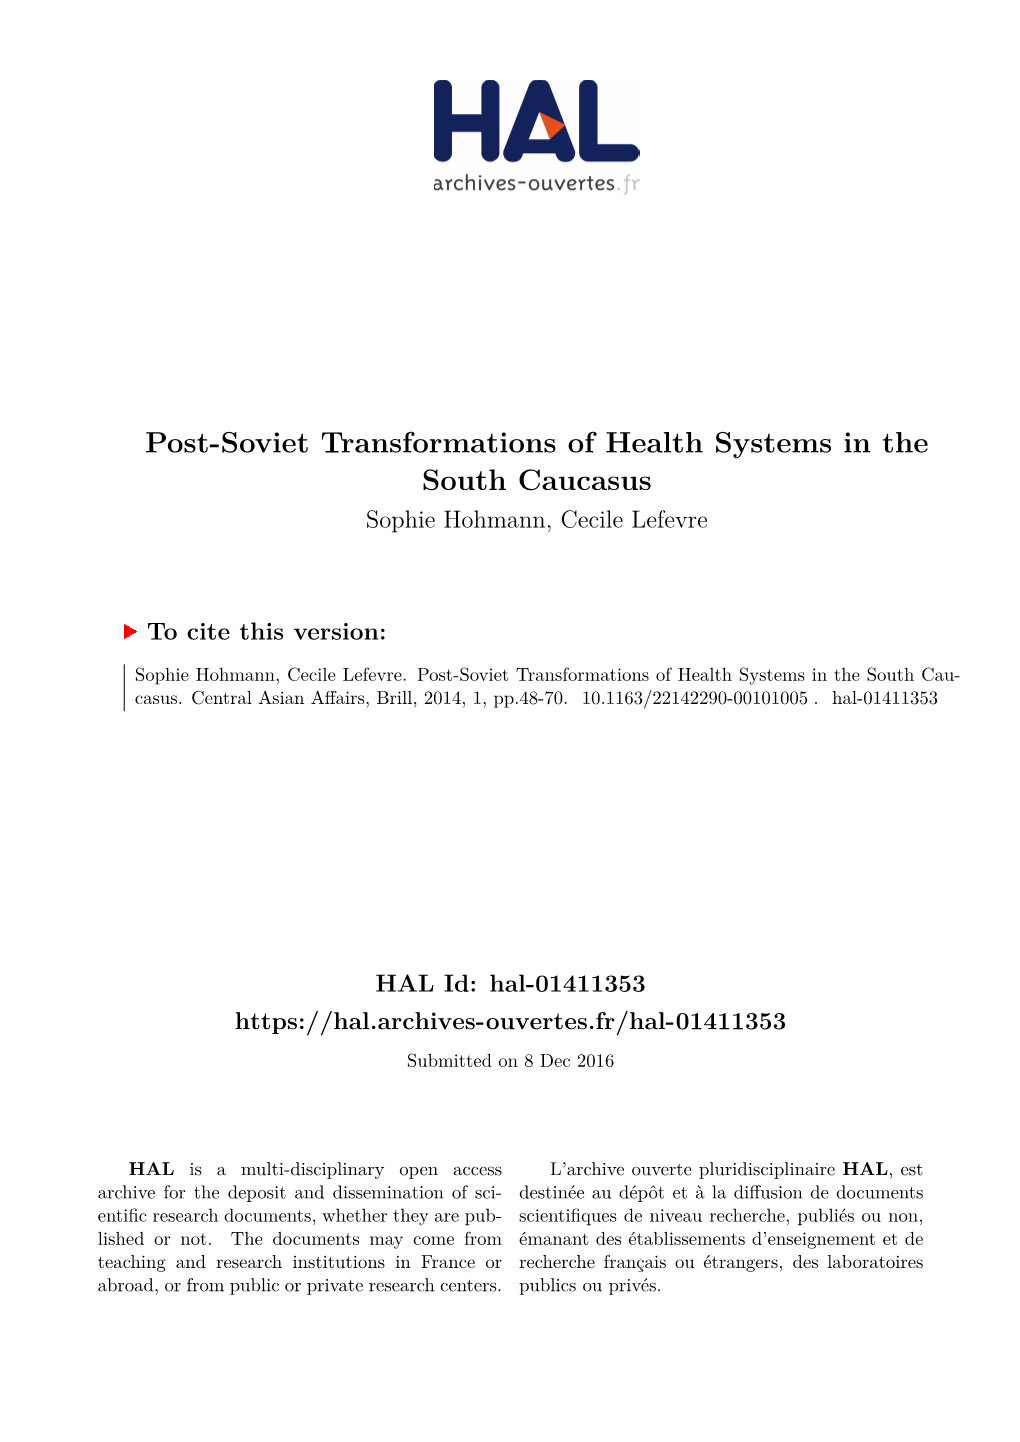 Post-Soviet Transformations of Health Systems in the South Caucasus Sophie Hohmann, Cecile Lefevre